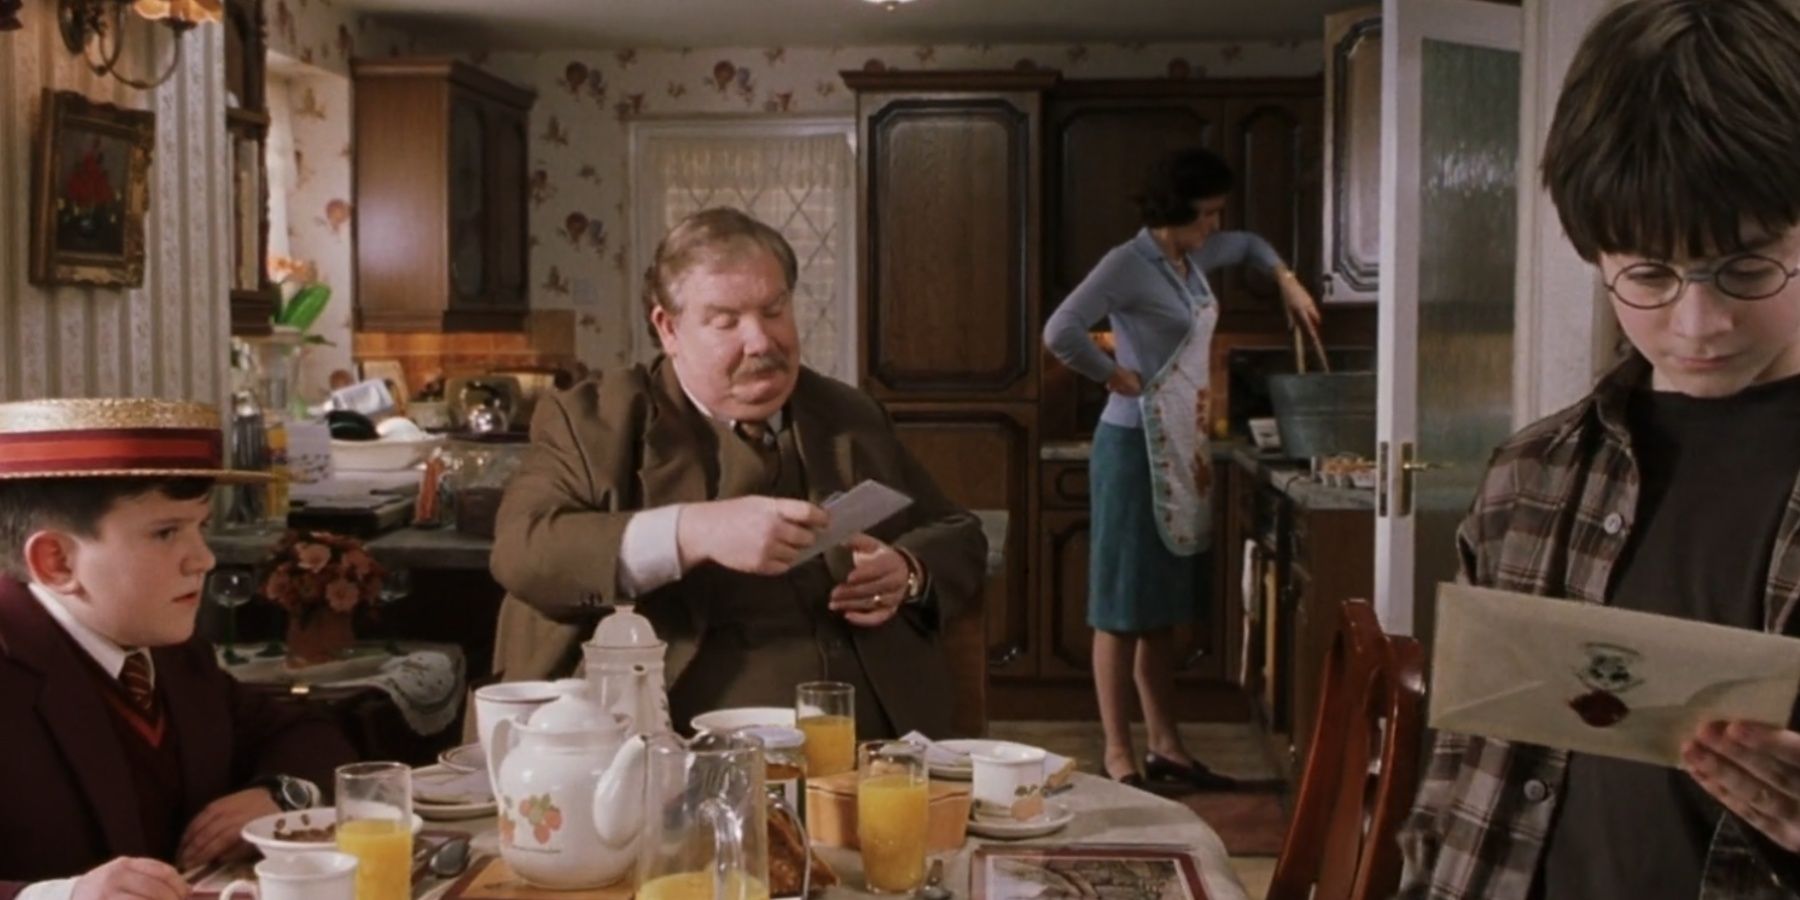 Dudley Vernon Petunia and Harry in Harry Potter and the Philosopher's Stone.